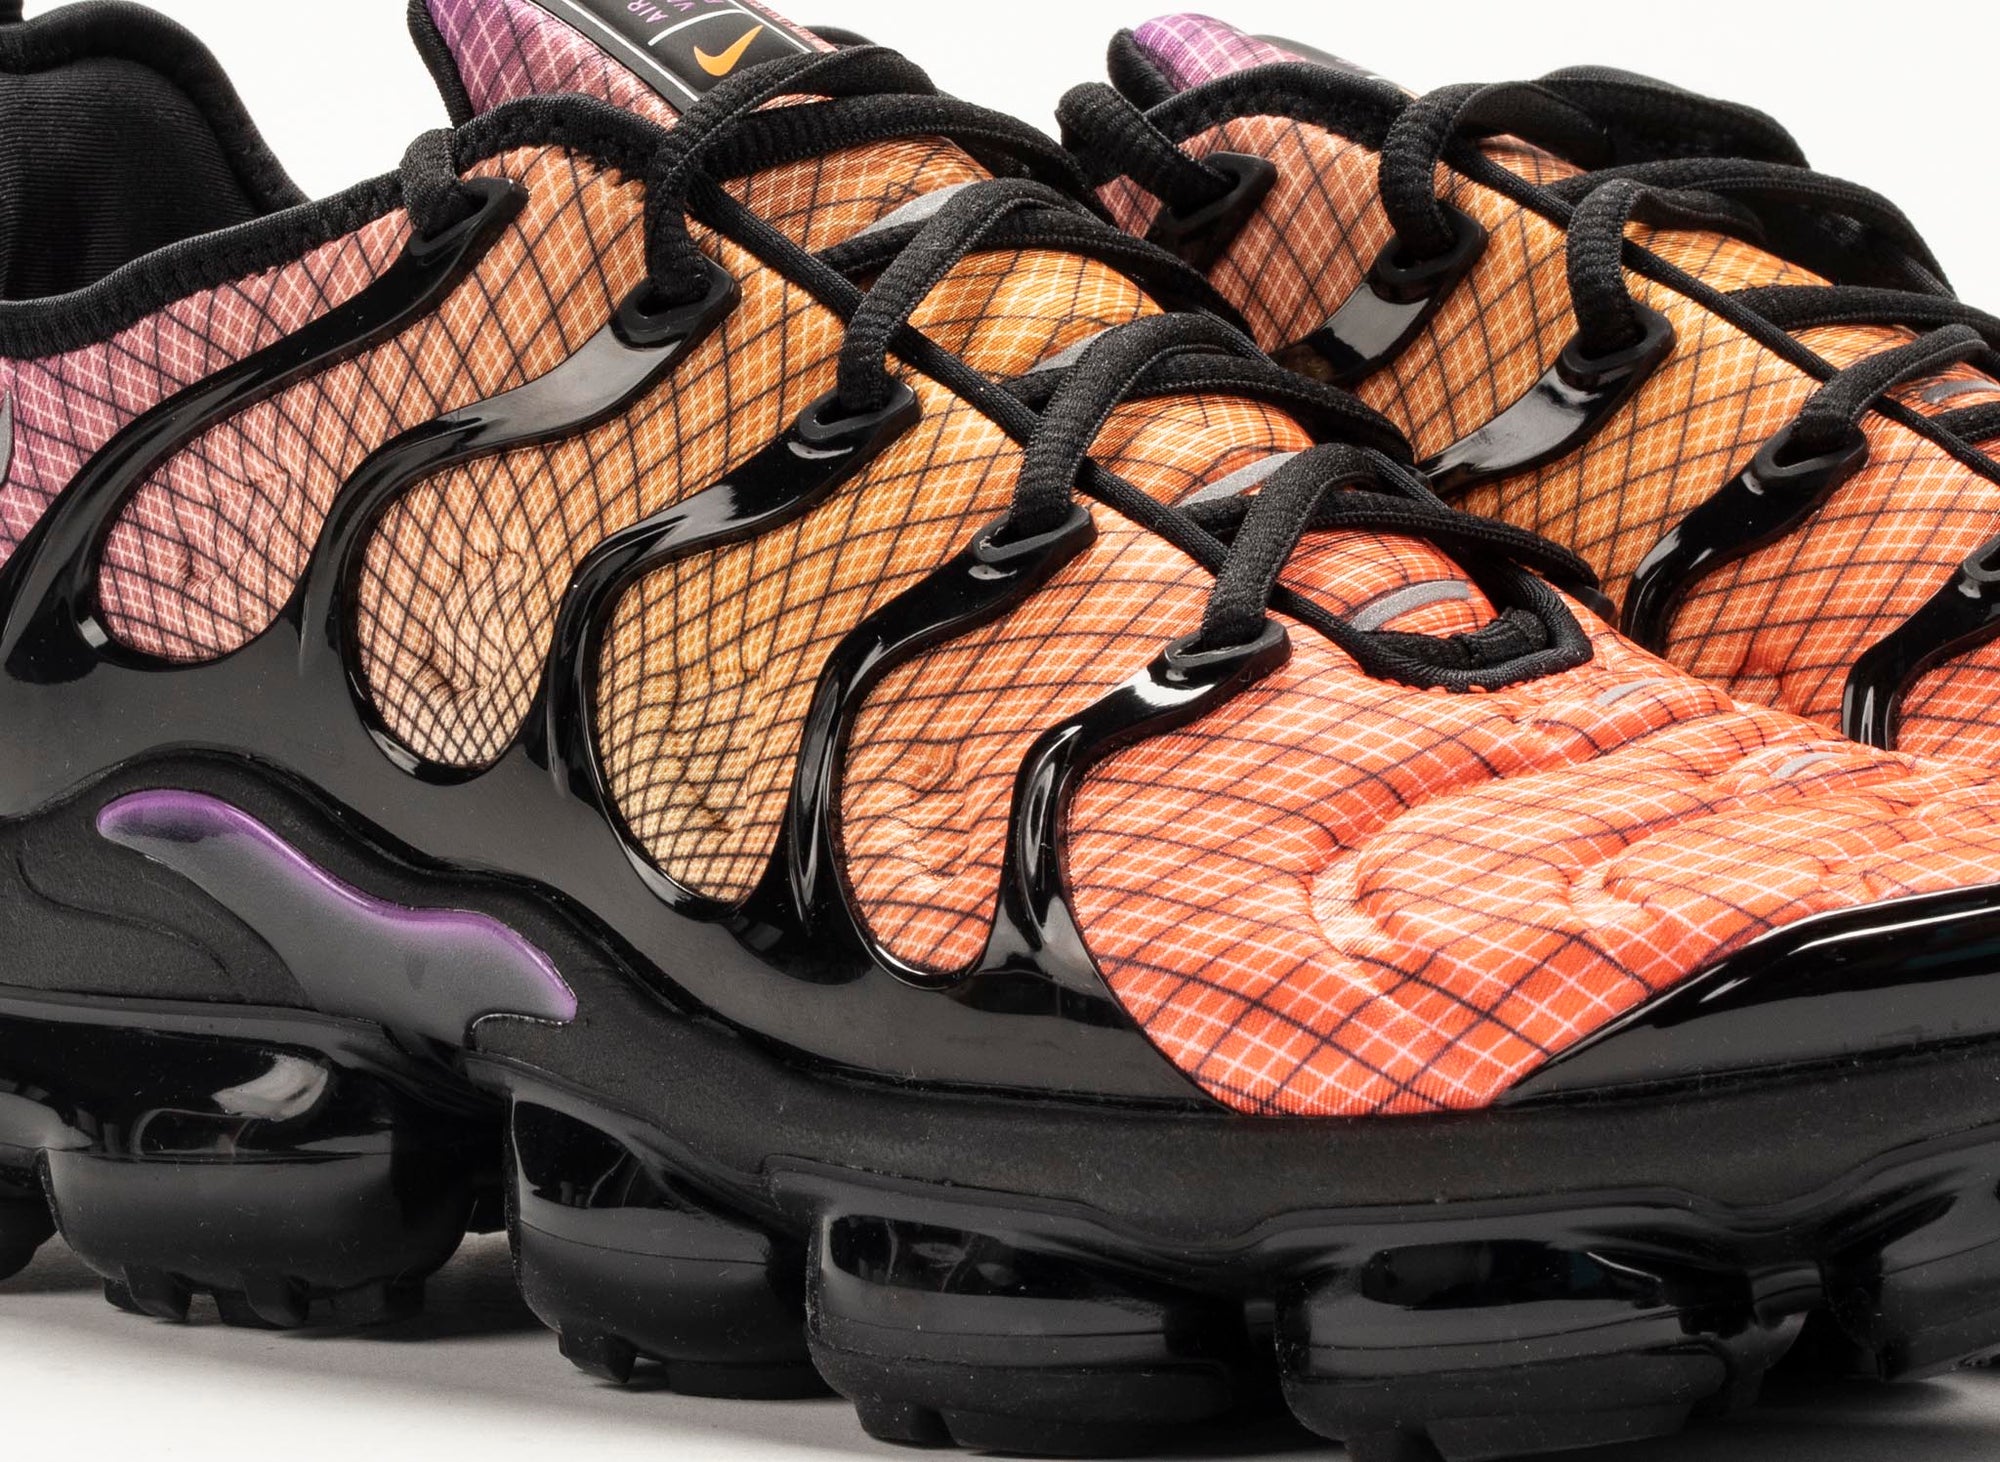 Nike Air Vapormax Plus With images Sneakers men fashion